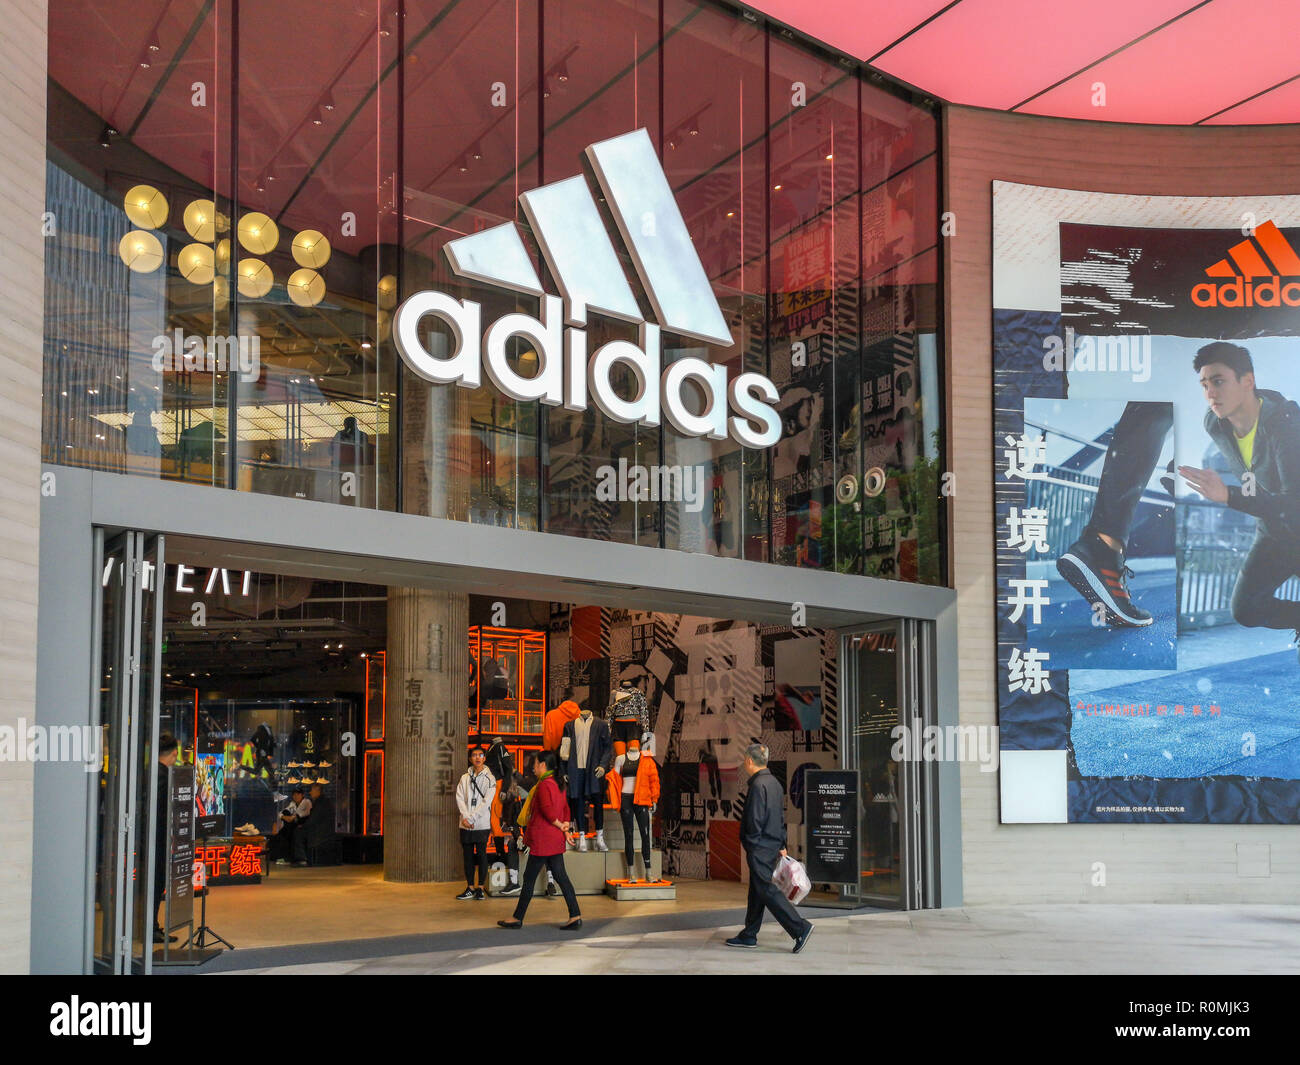 Shanghai, China. 6th Nov, 2018. The Adidas Brand Center opens in Shanghai, China. Credit: SIPA Asia/ZUMA Wire/Alamy Live News Stock Photo